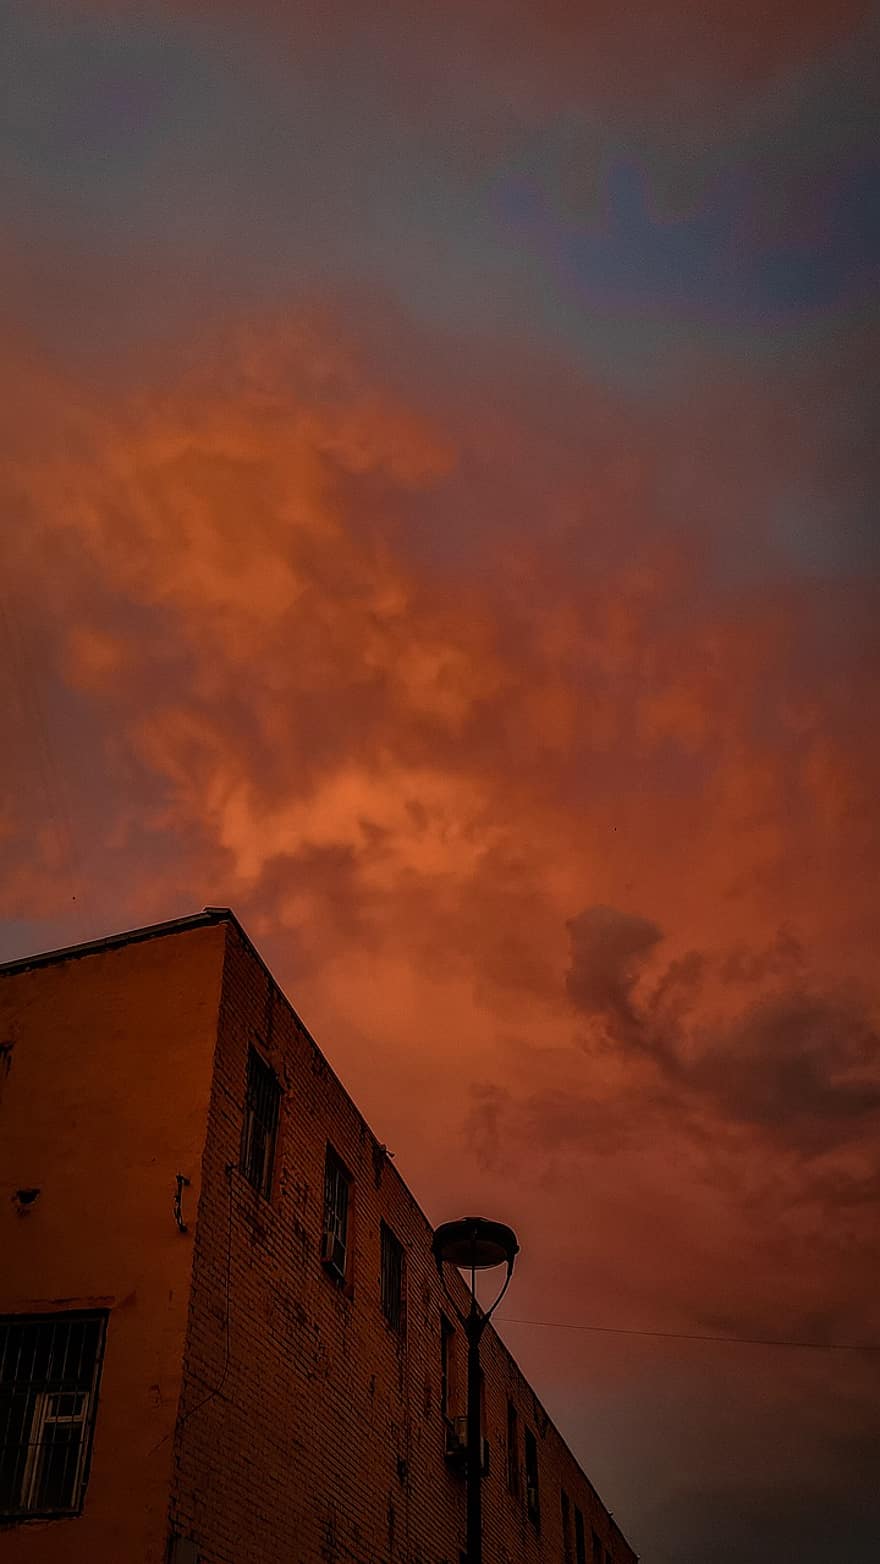 Building, Sky, Sunset, Clouds, Moscow, Russia, City, Urban, Dusk, Evening, Cloudy